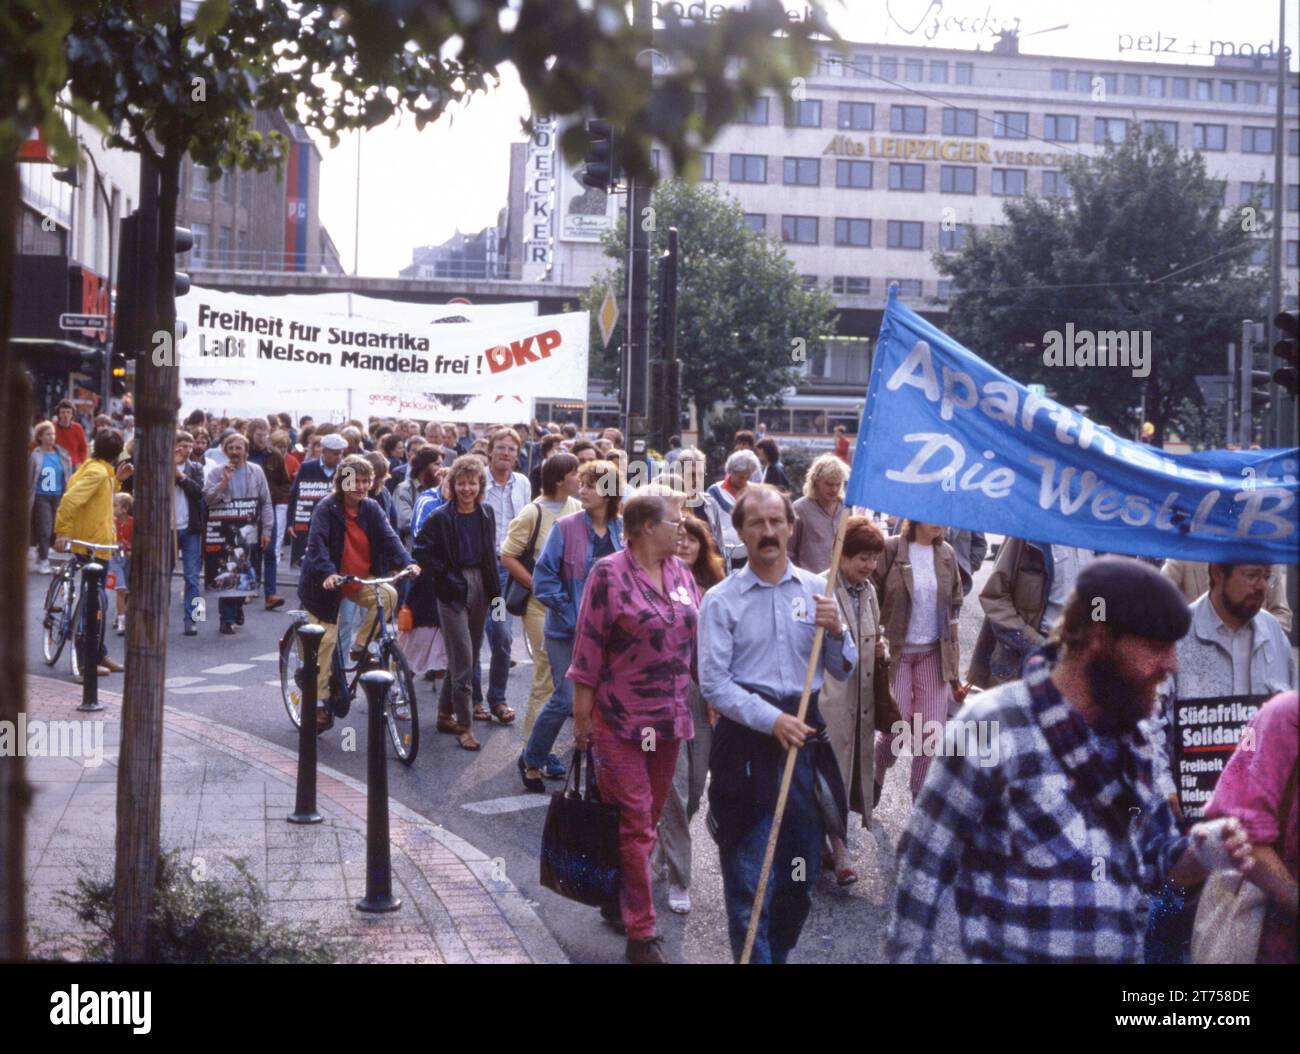 DEU, Germany: The historical slides from the 84-85 r years, Bonn. Peace movement demonstrates against apartheid and for freedom Nelson Mandela ca. Stock Photo